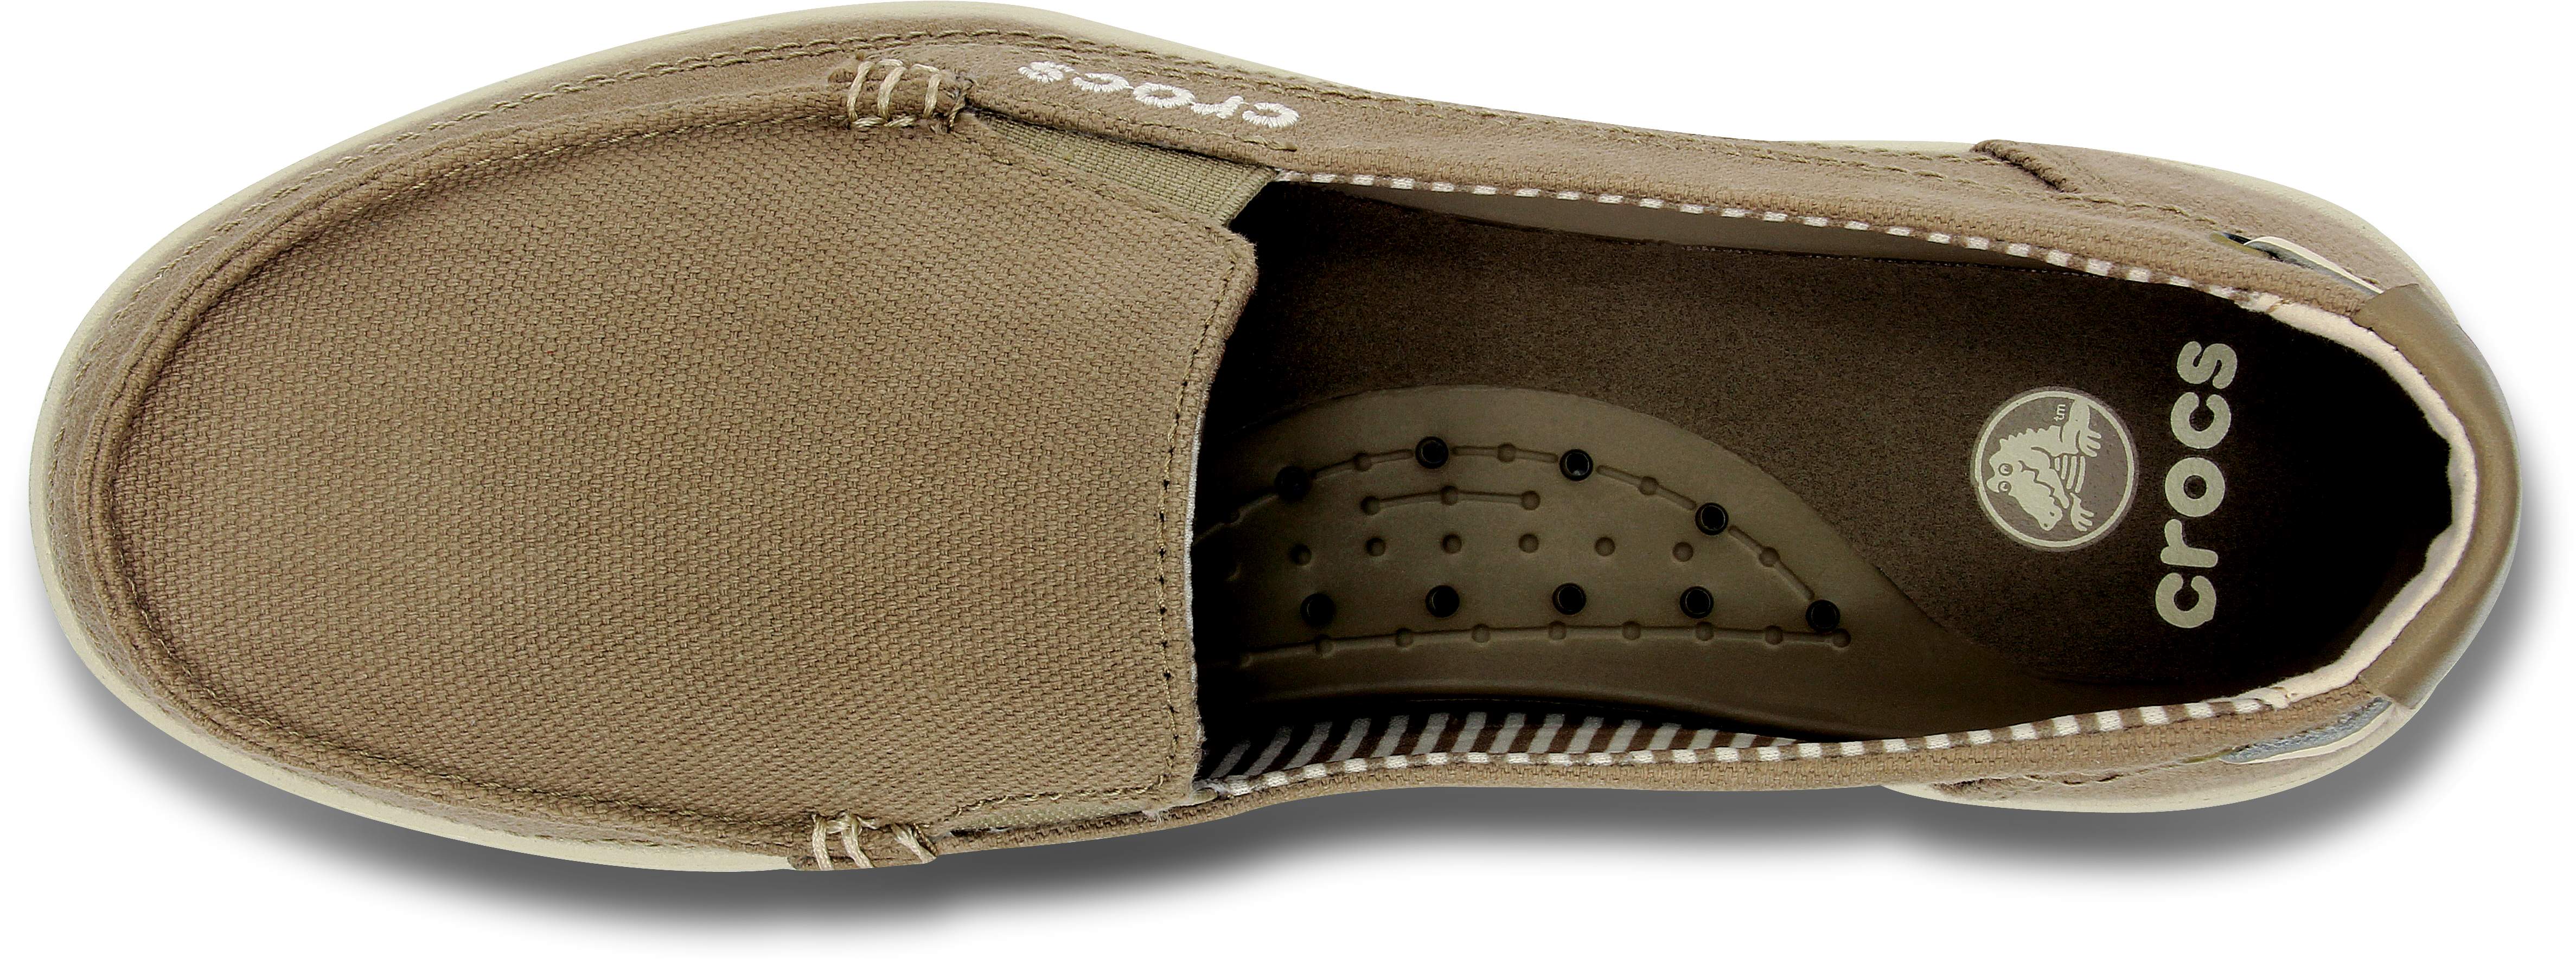 croc canvas loafers